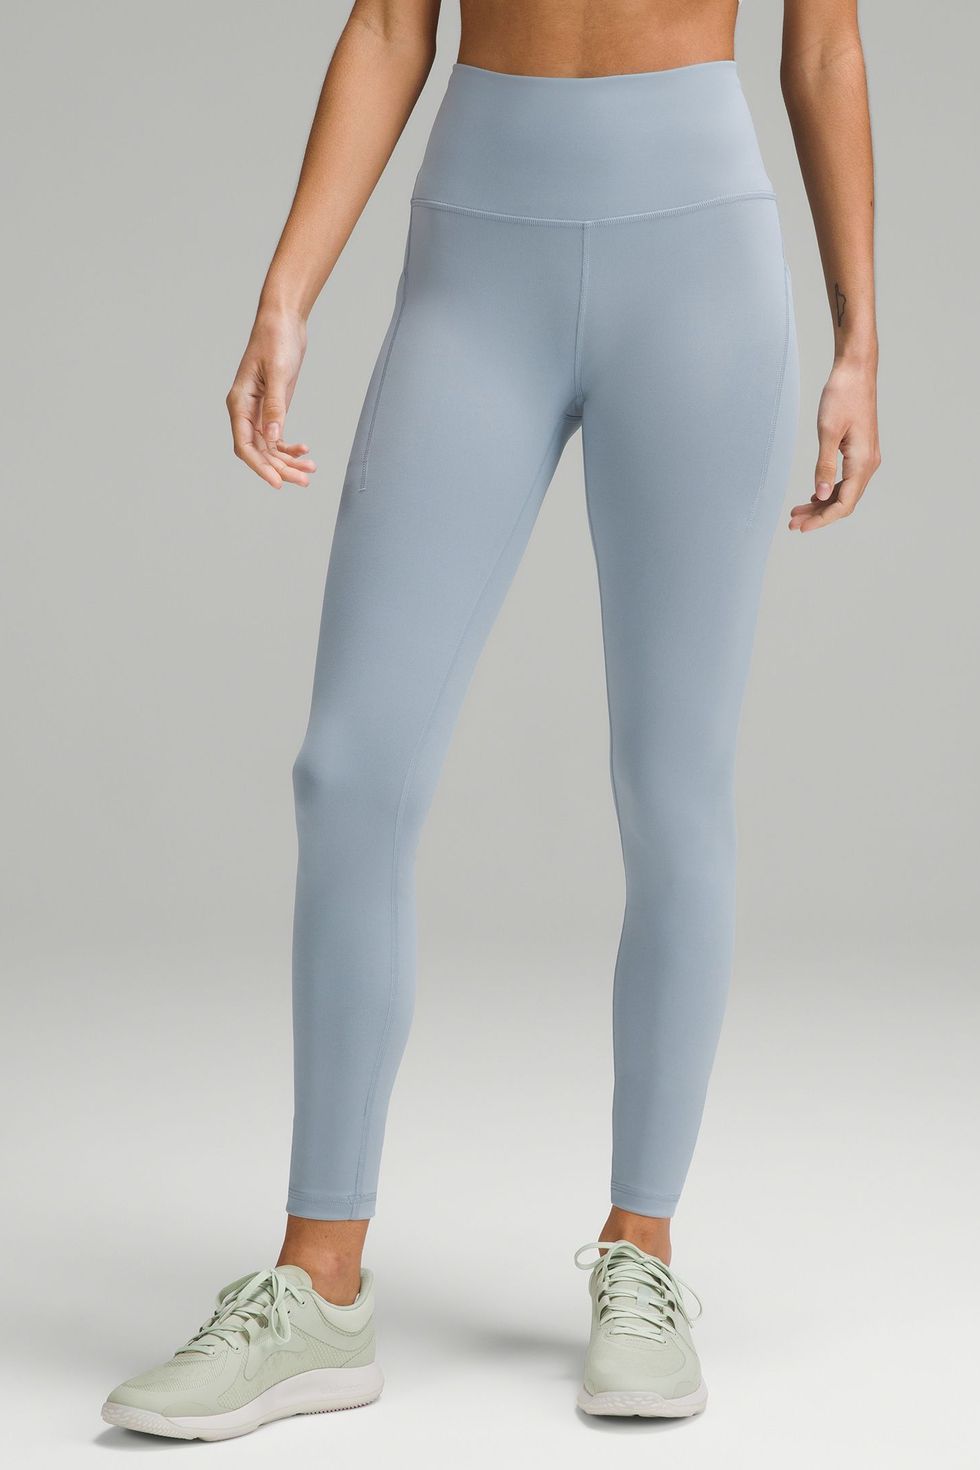 Lululemon Align High Rise Pant with Pockets 25 - Water Drop